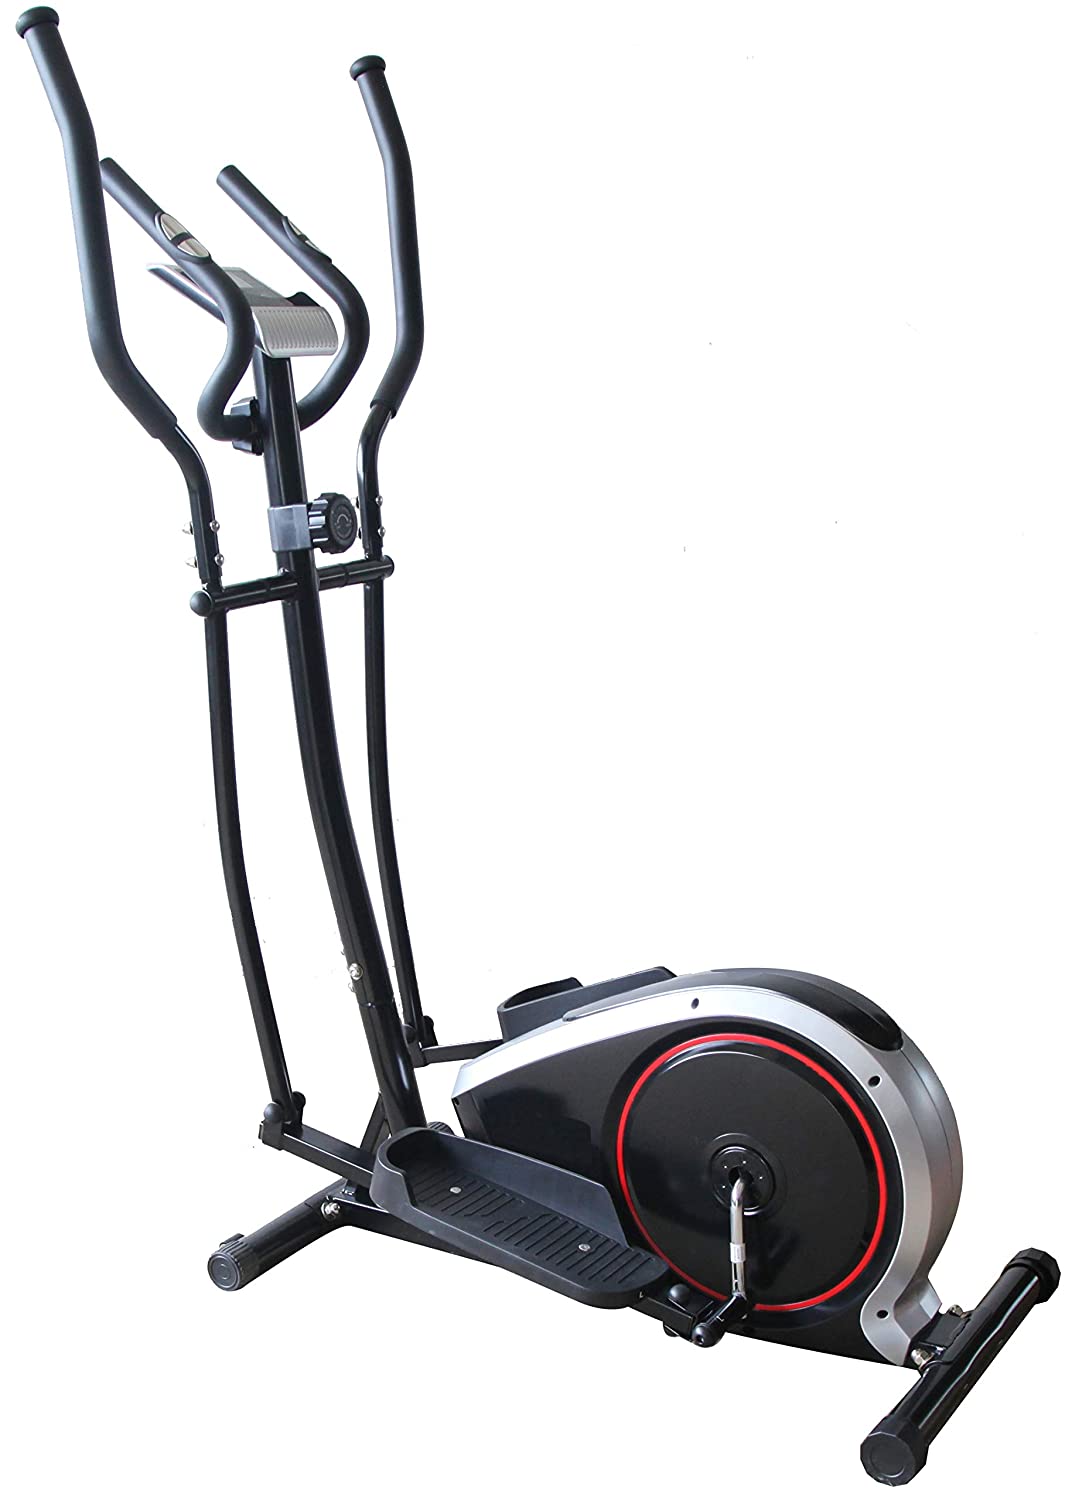 a budget cross trainer for home with 5 kg flywheel